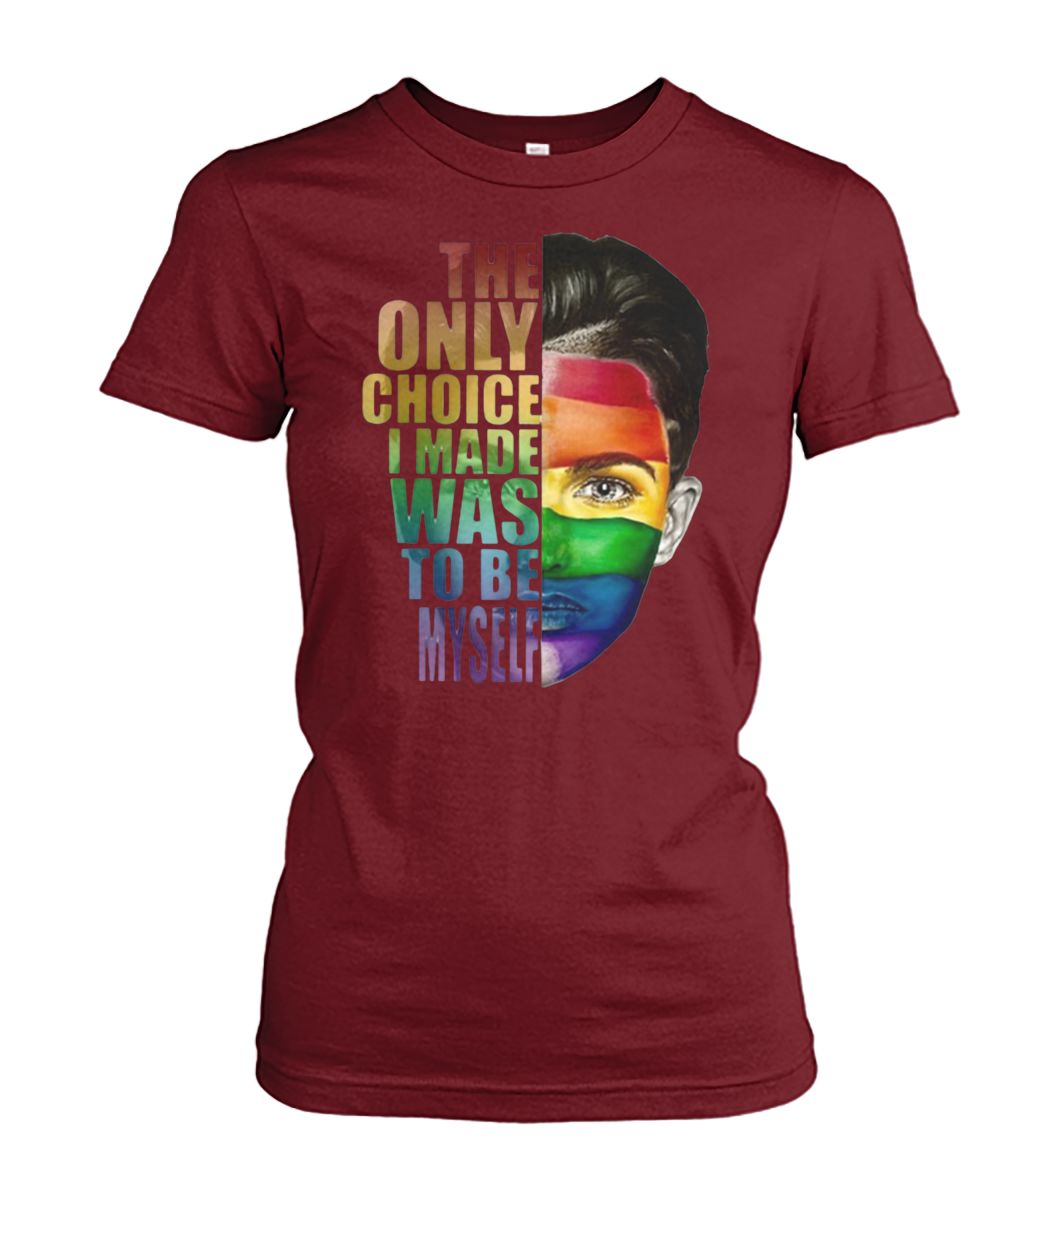 Ruby rose the only choice i made was to be myself LGBT women's crew tee